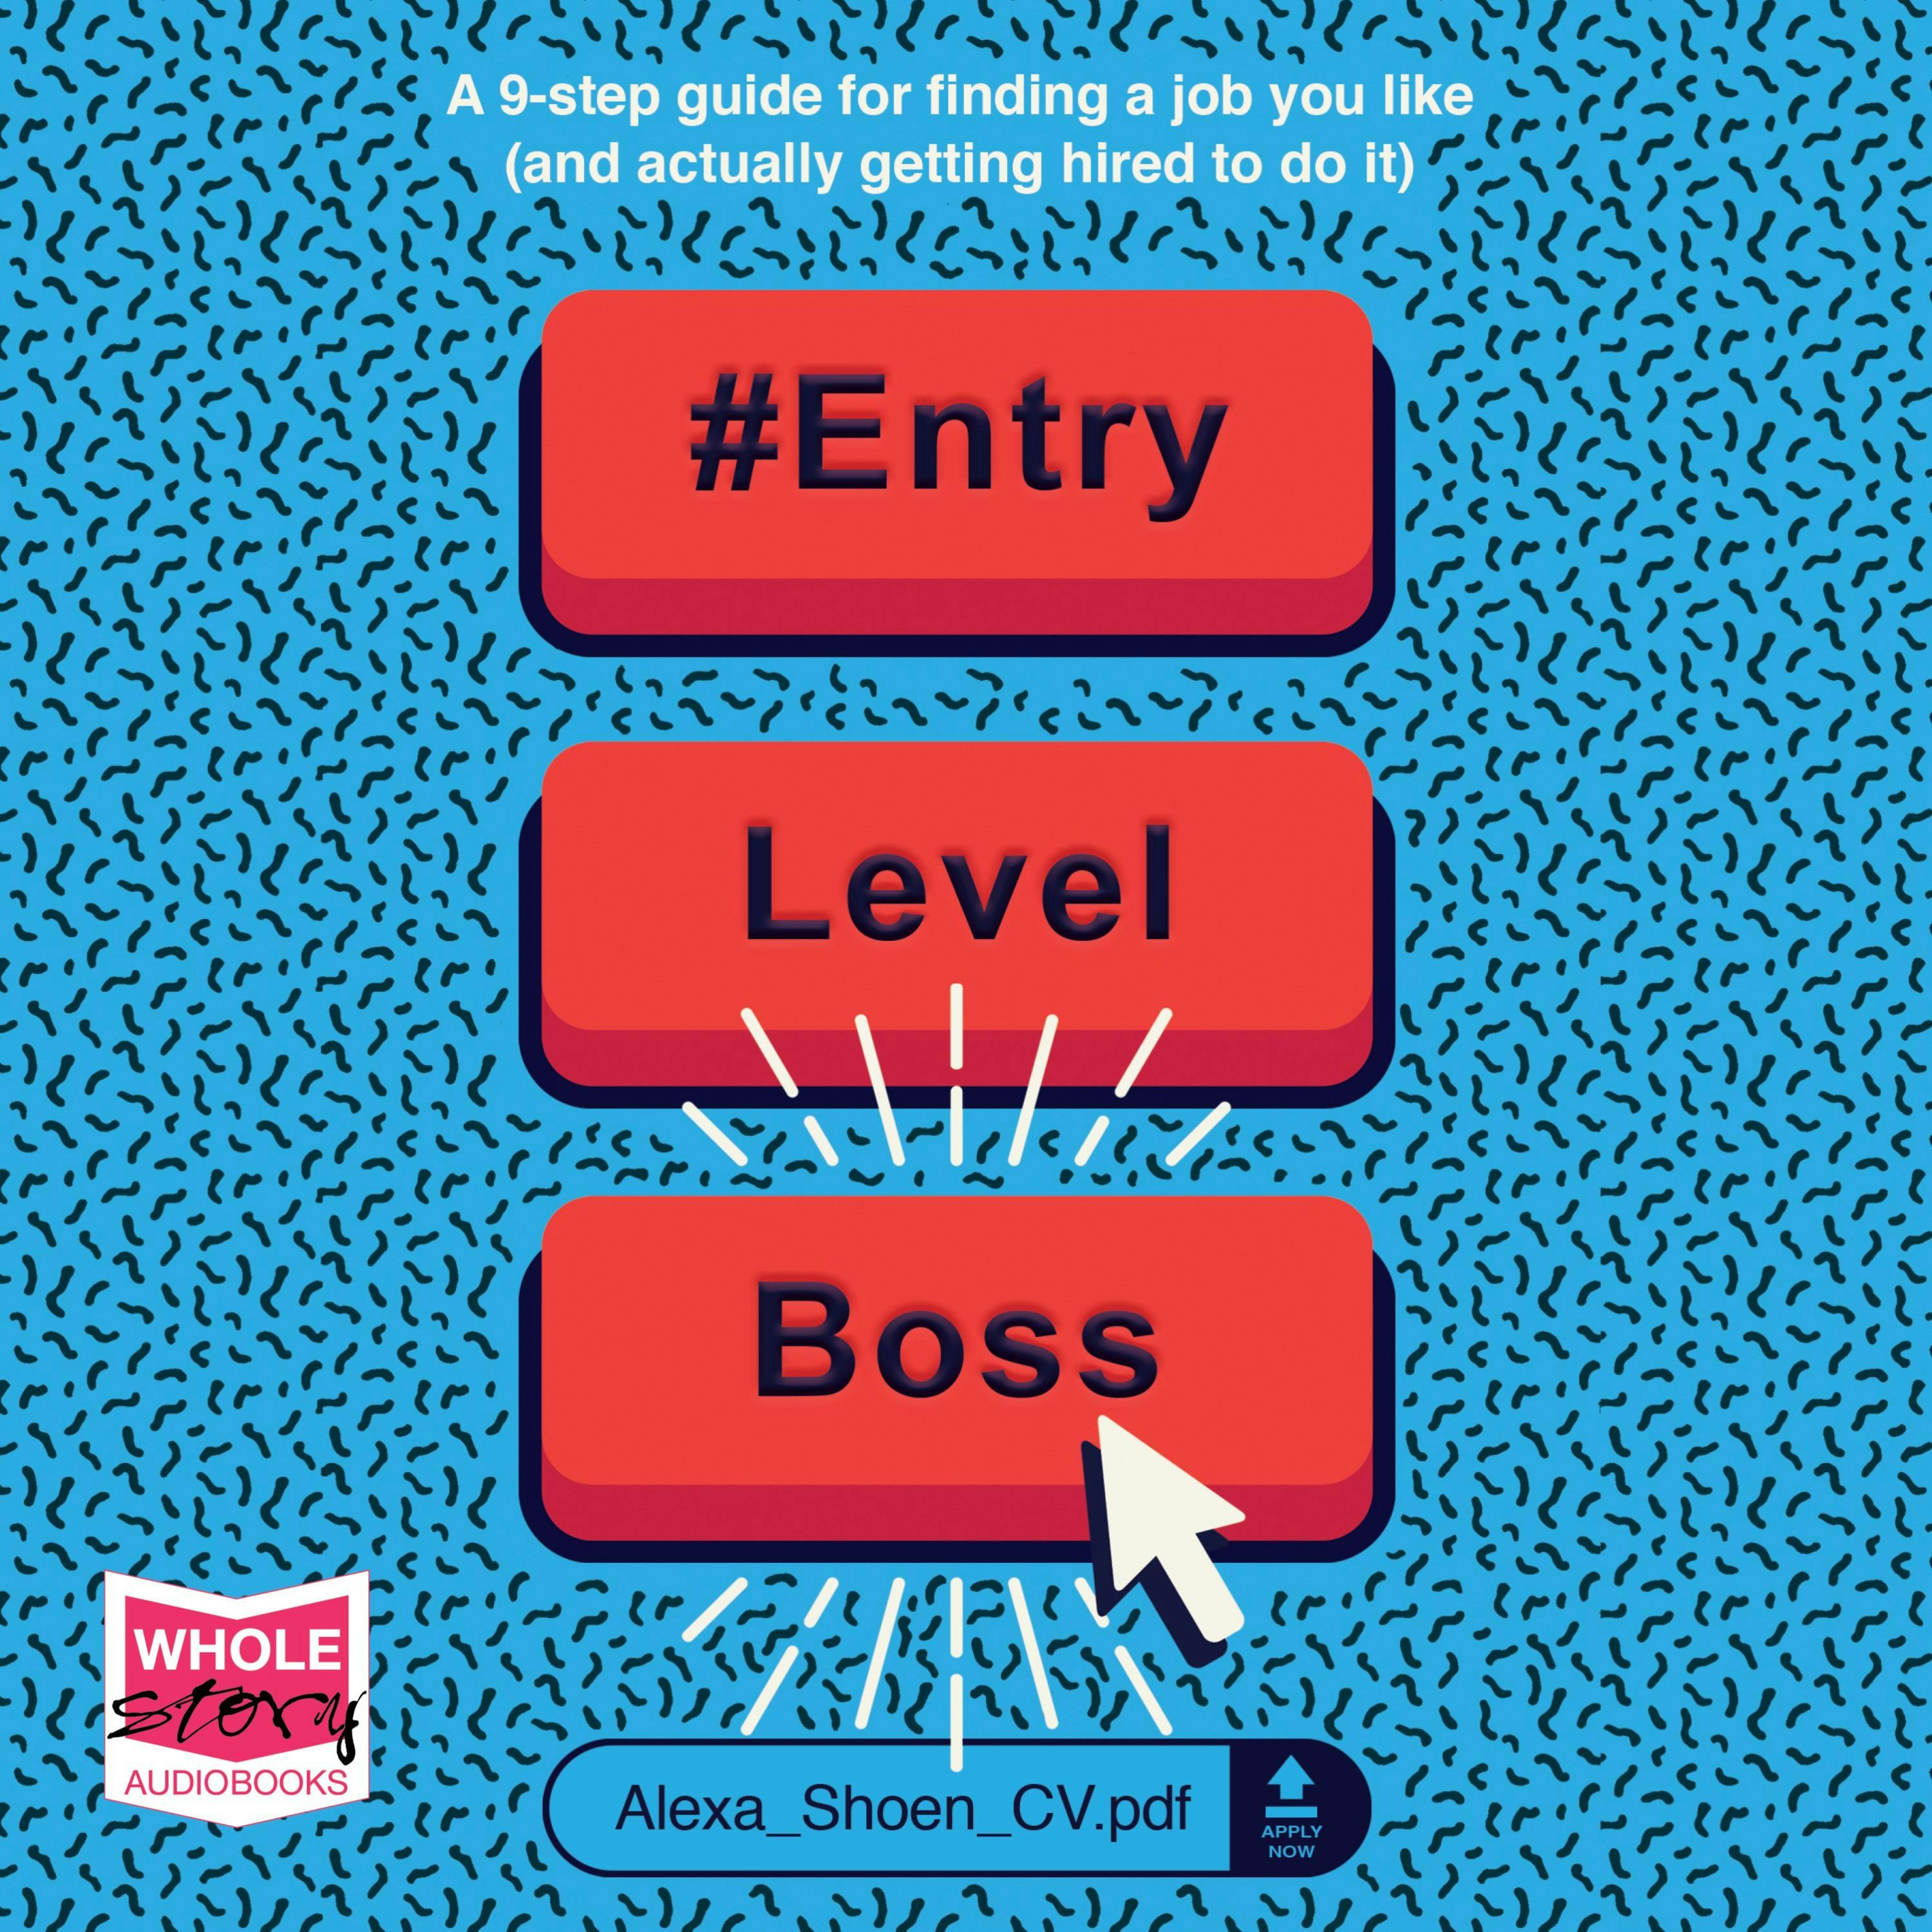 #ENTRYLEVELBOSS: a 9-step guide for finding a job you like (and actually getting hired to do it) - Alexa Shoen